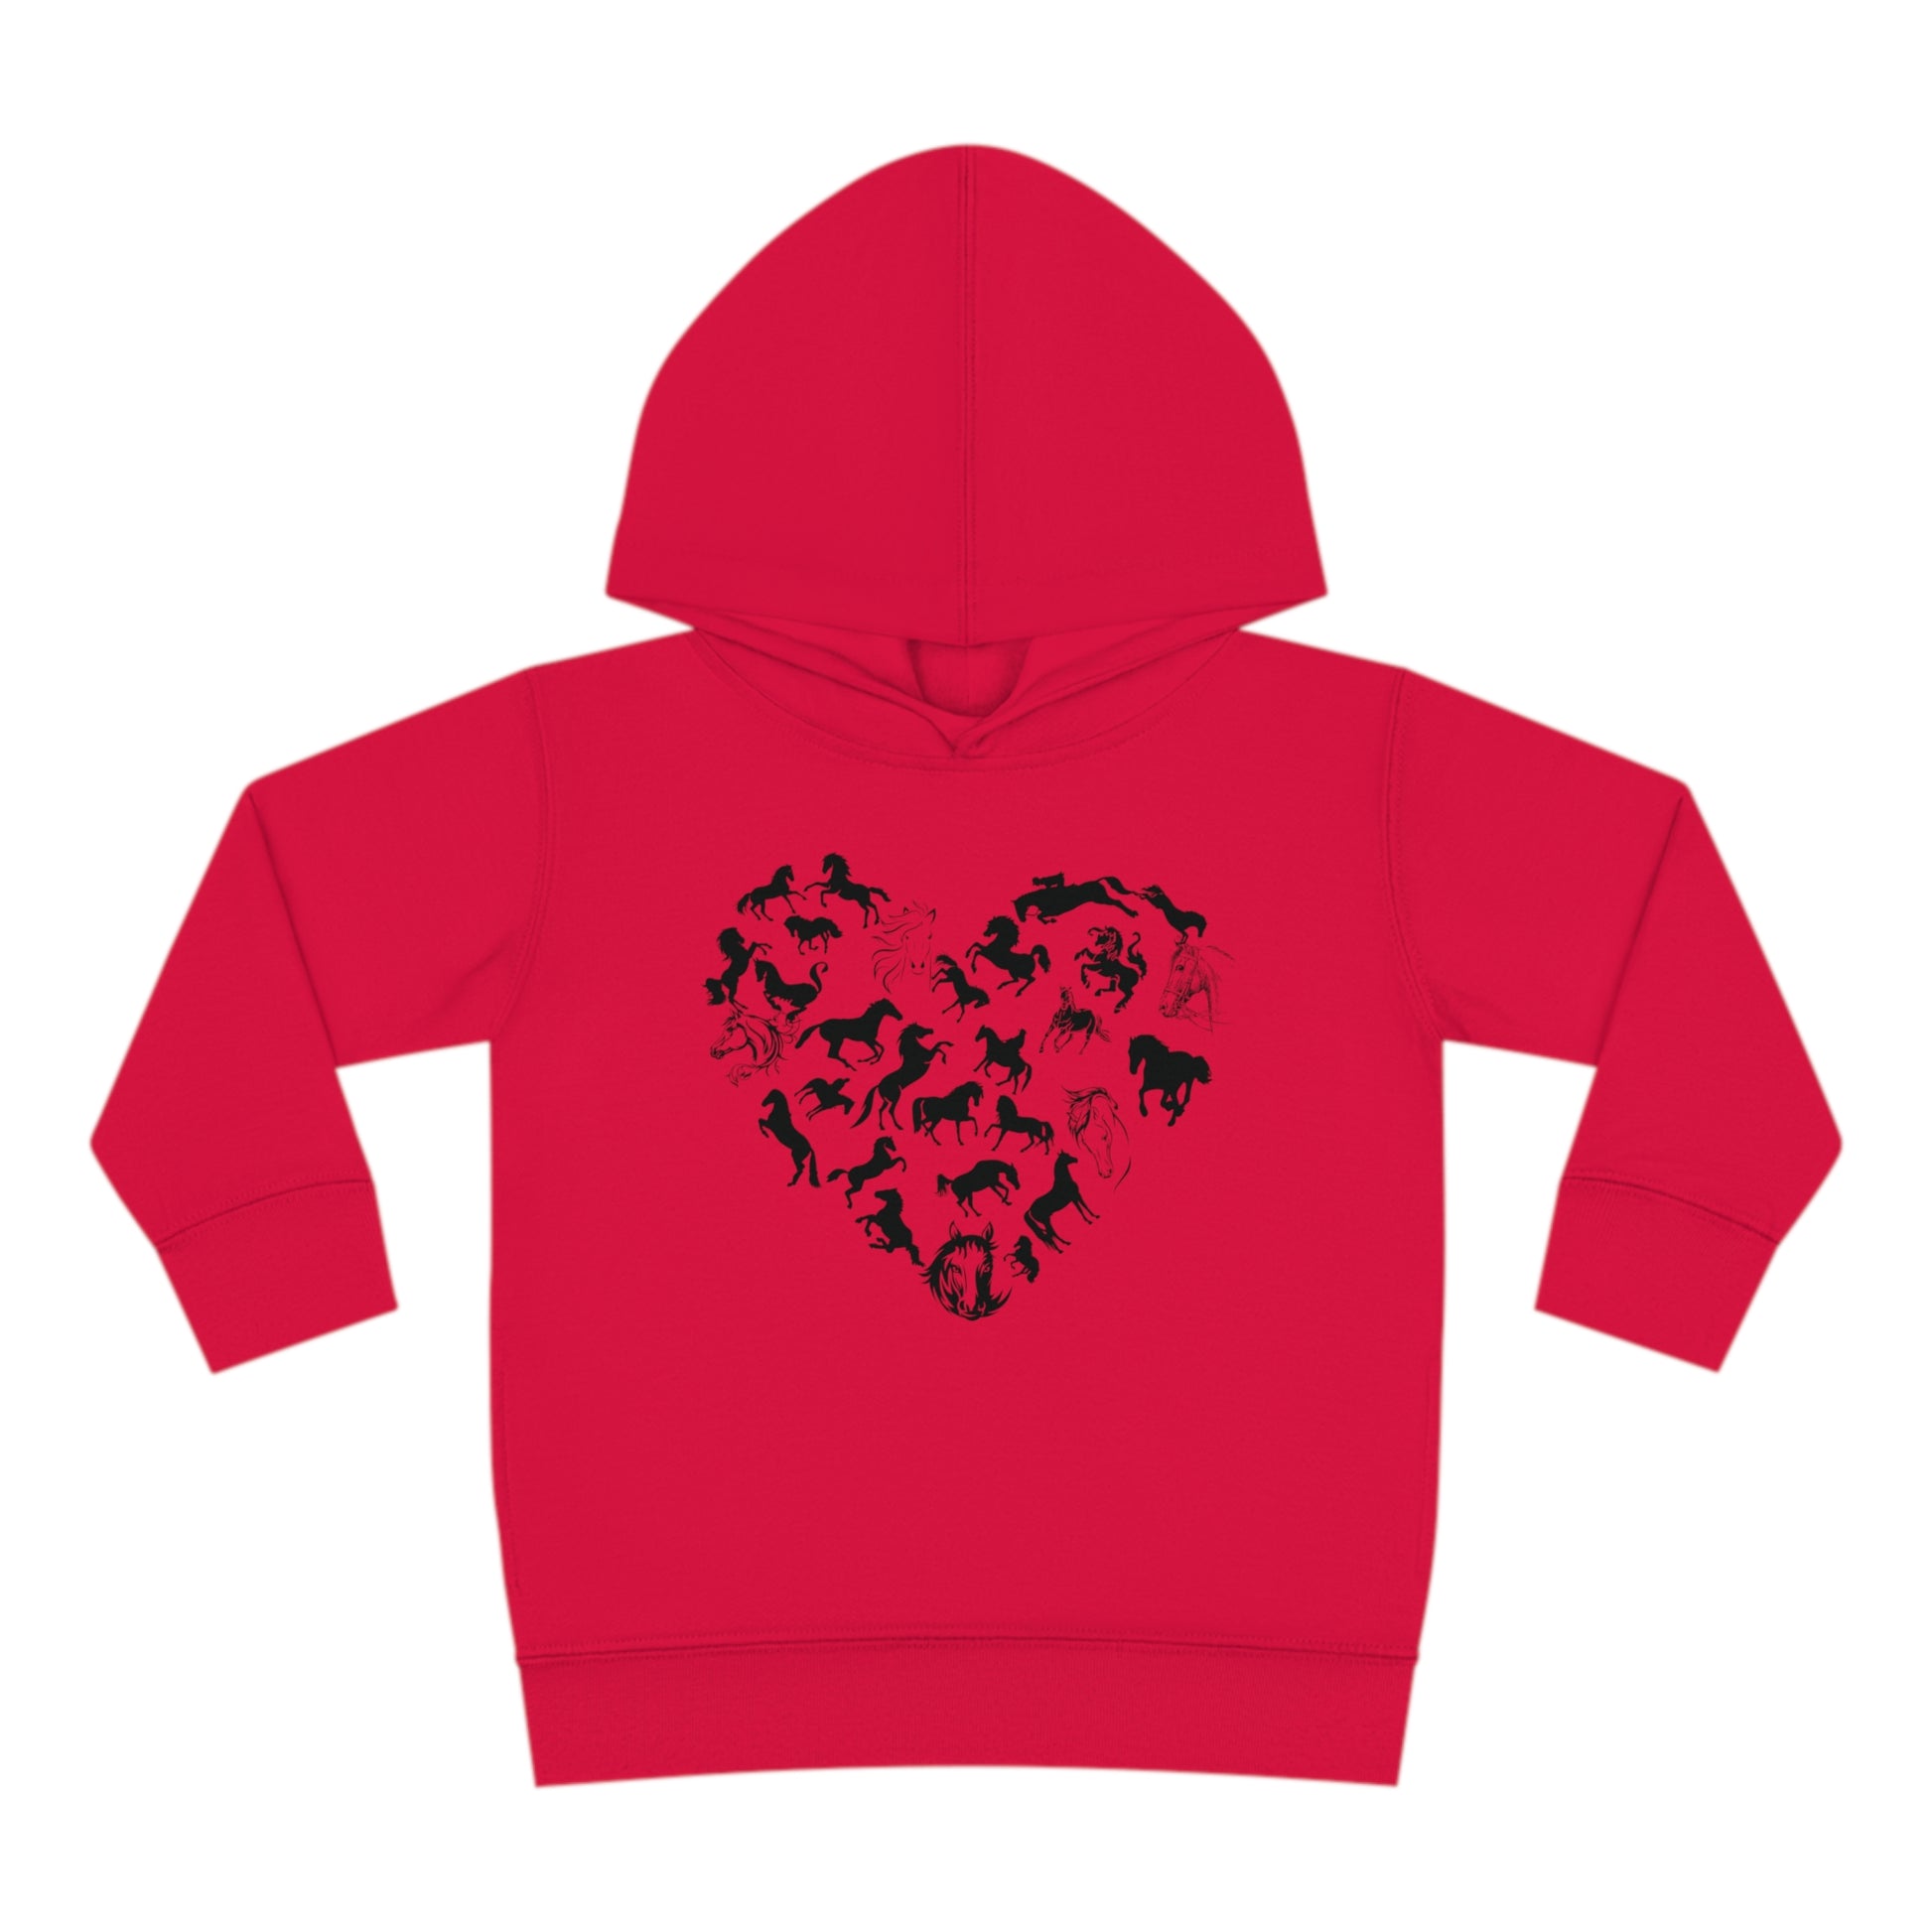 Horse Heart Hoodie | Horse Lover Tee - Horses Heart Toddler - Horse Lover Gift - Horse Toddler Shirt - Equestrian Tee - Gift for Horse Owner Kids clothes Red 2T 